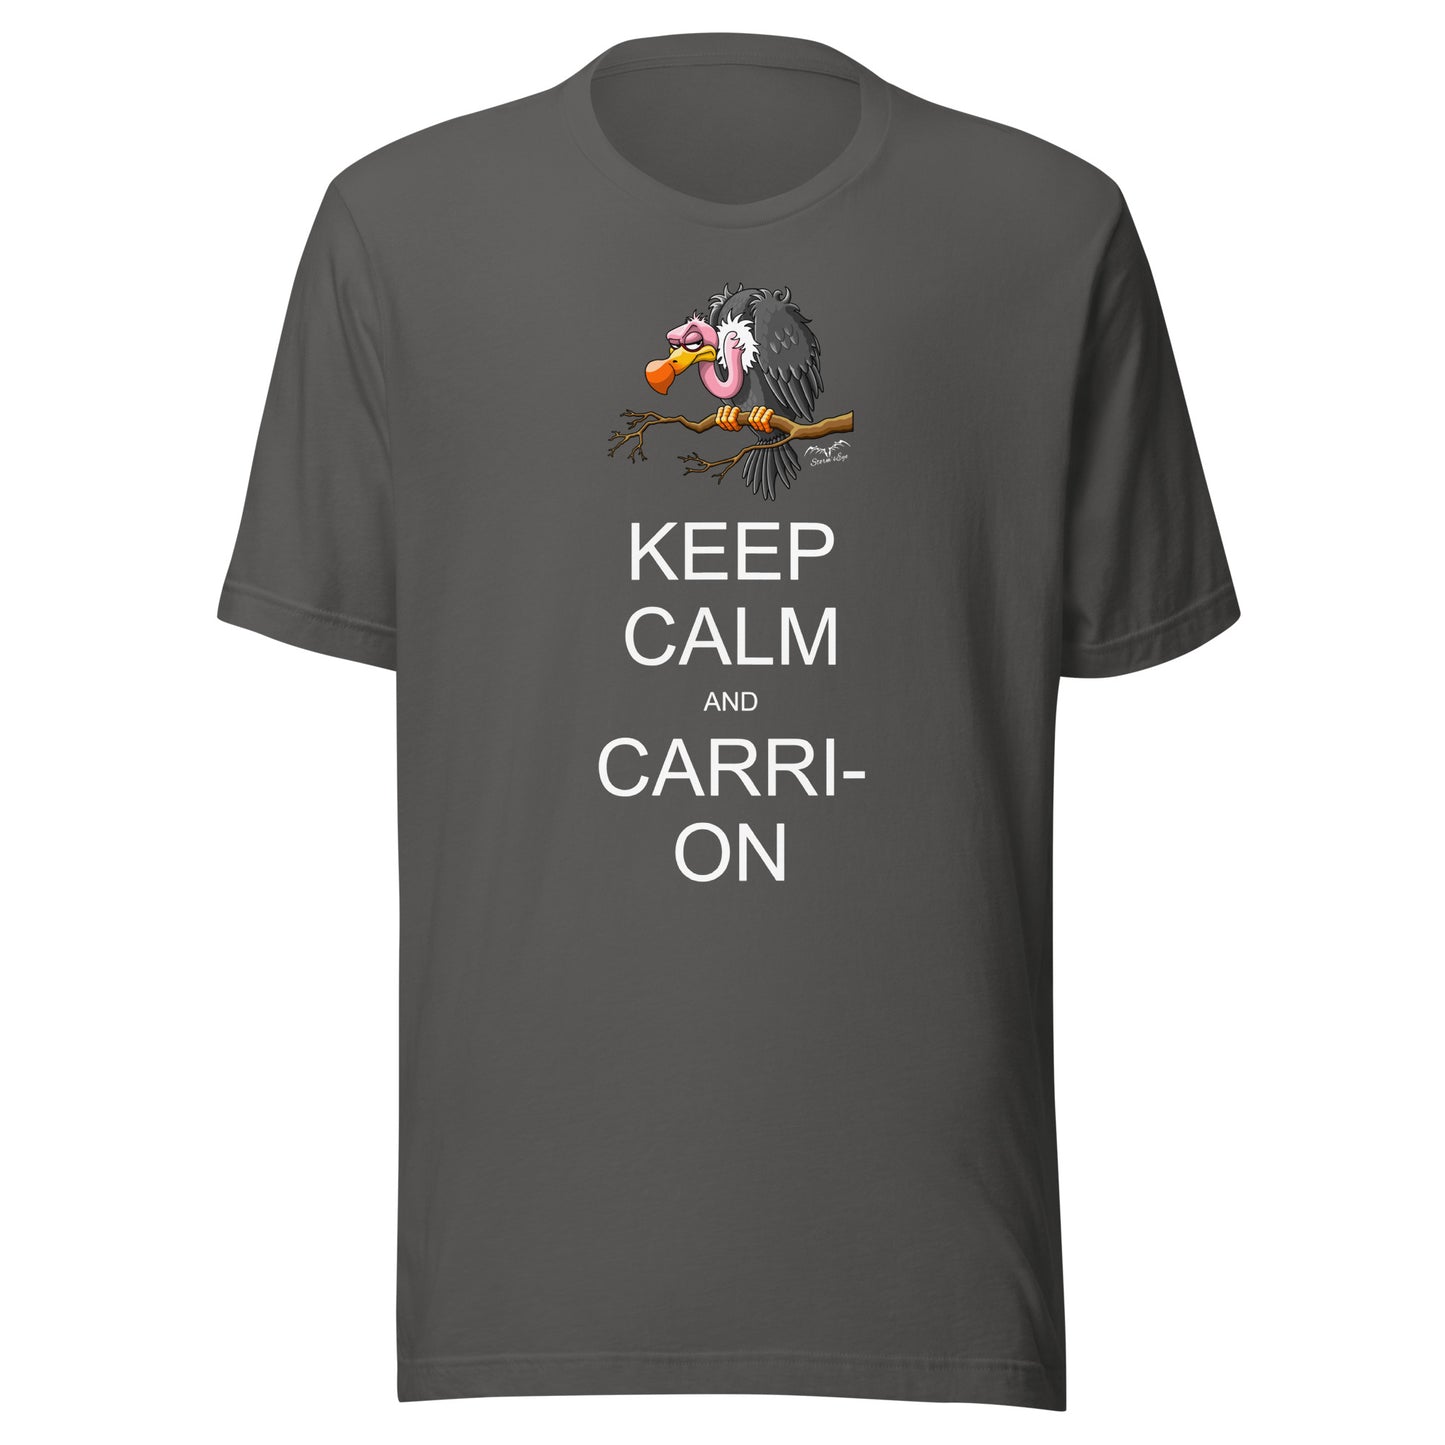 keep calm and carrion vulture t-shirt grey by stormseye design